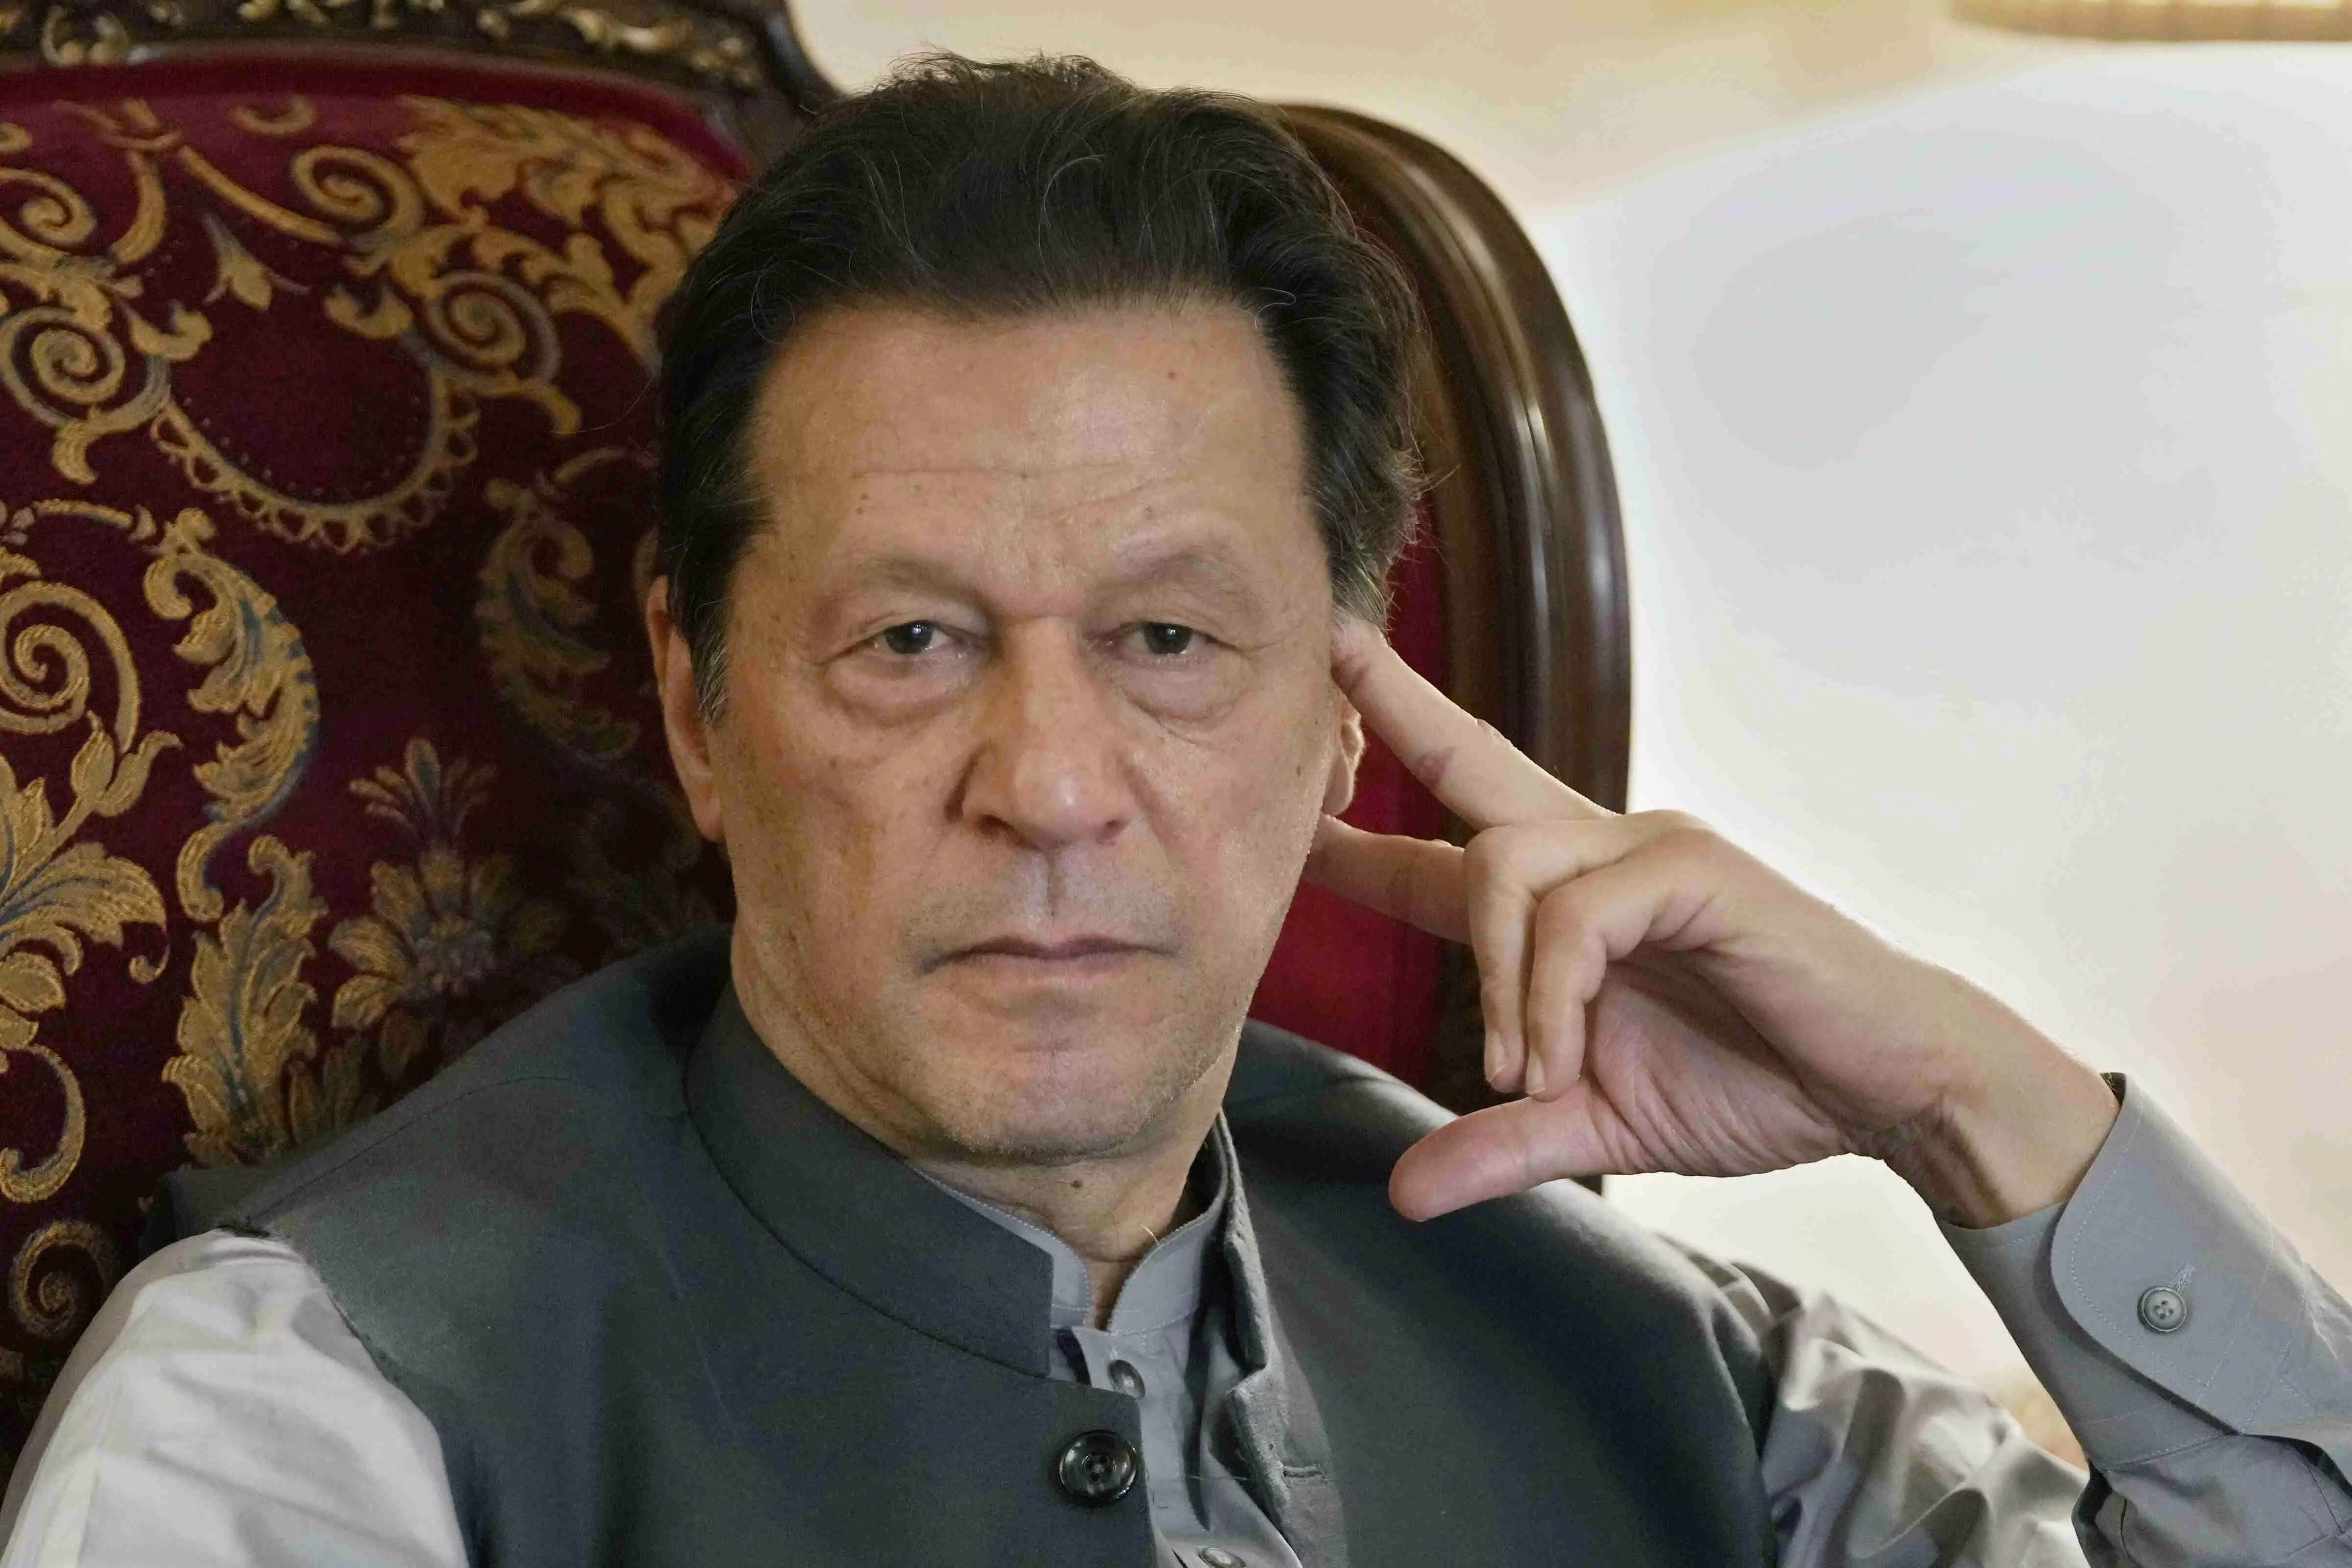 Pakistans former premier Imran Khan sentenced to three years in prison in Toshakhana corruption case